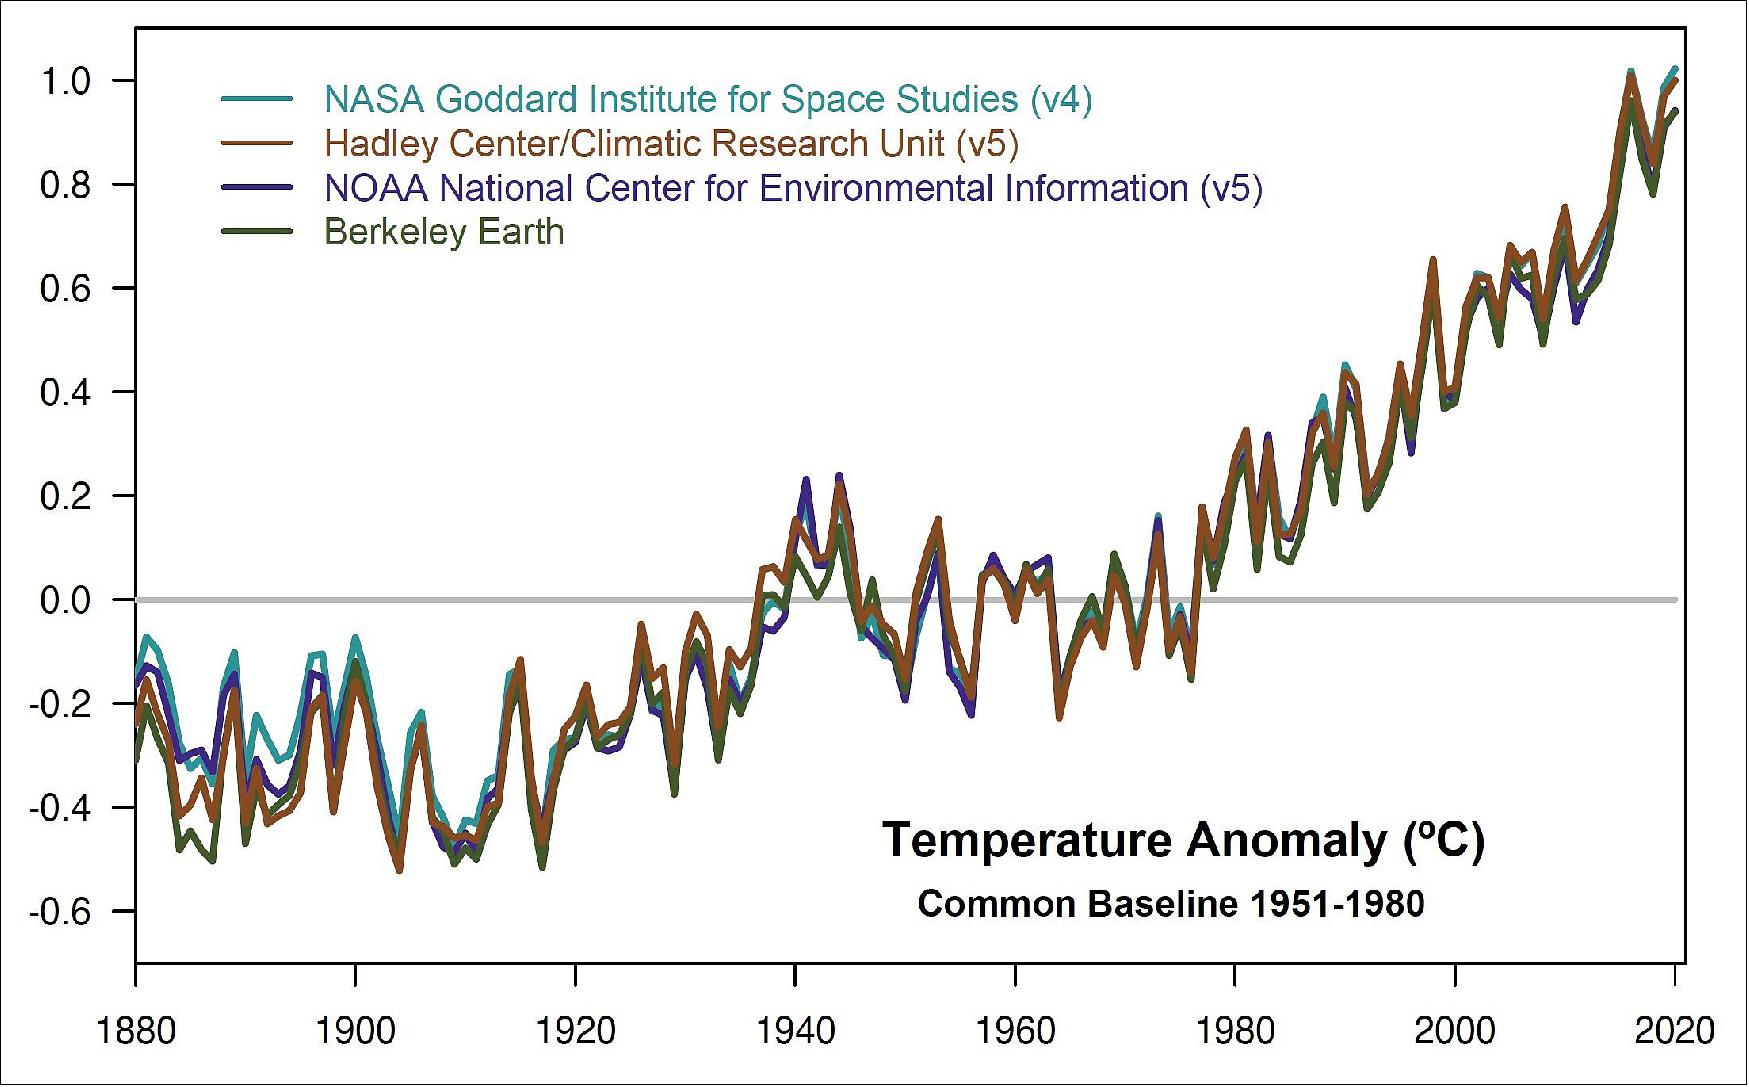 Figure 11: This plot shows yearly temperature anomalies from 1880 to 2019, with respect to the 1951-1980 mean, as recorded by NASA, NOAA, the Berkeley Earth research group, and the Met Office Hadley Centre (UK). Though there are minor variations from year to year, all five temperature records show peaks and valleys in sync with each other. All show rapid warming in the past few decades, and all show the past decade has been the warmest (image credits: NASA GISS/Gavin Schmidt)